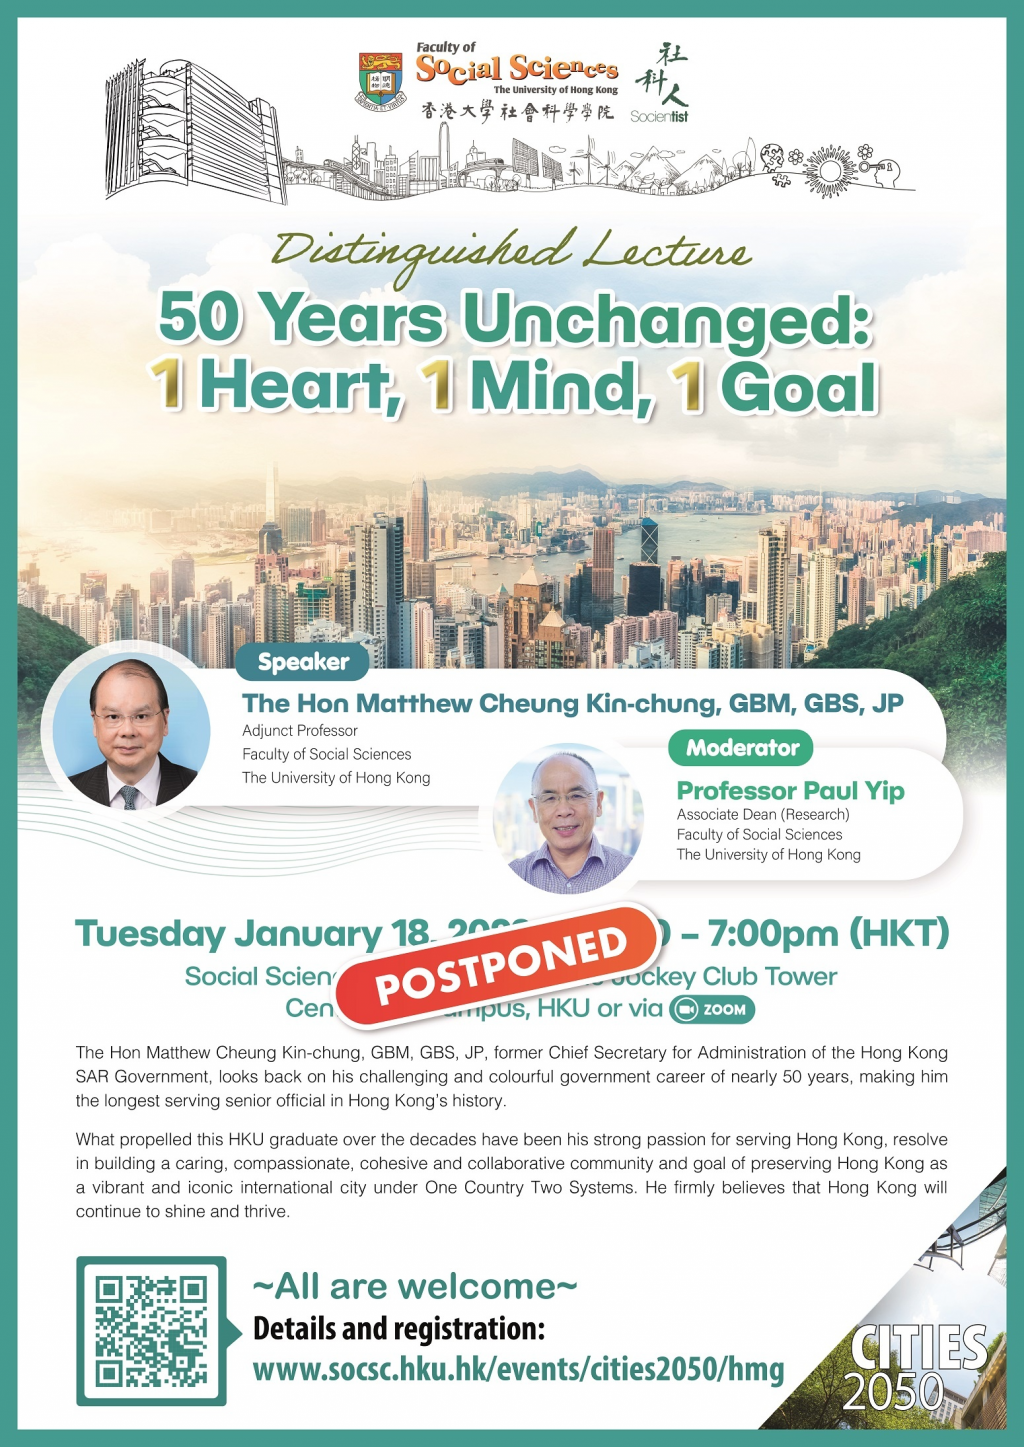 [POSTPONED]: Cities 2050 Research Cluster Distinguished Lecture - 50 Years Unchanged: 1 Heart, 1 Mind, 1 Goal (January 18, 2022)